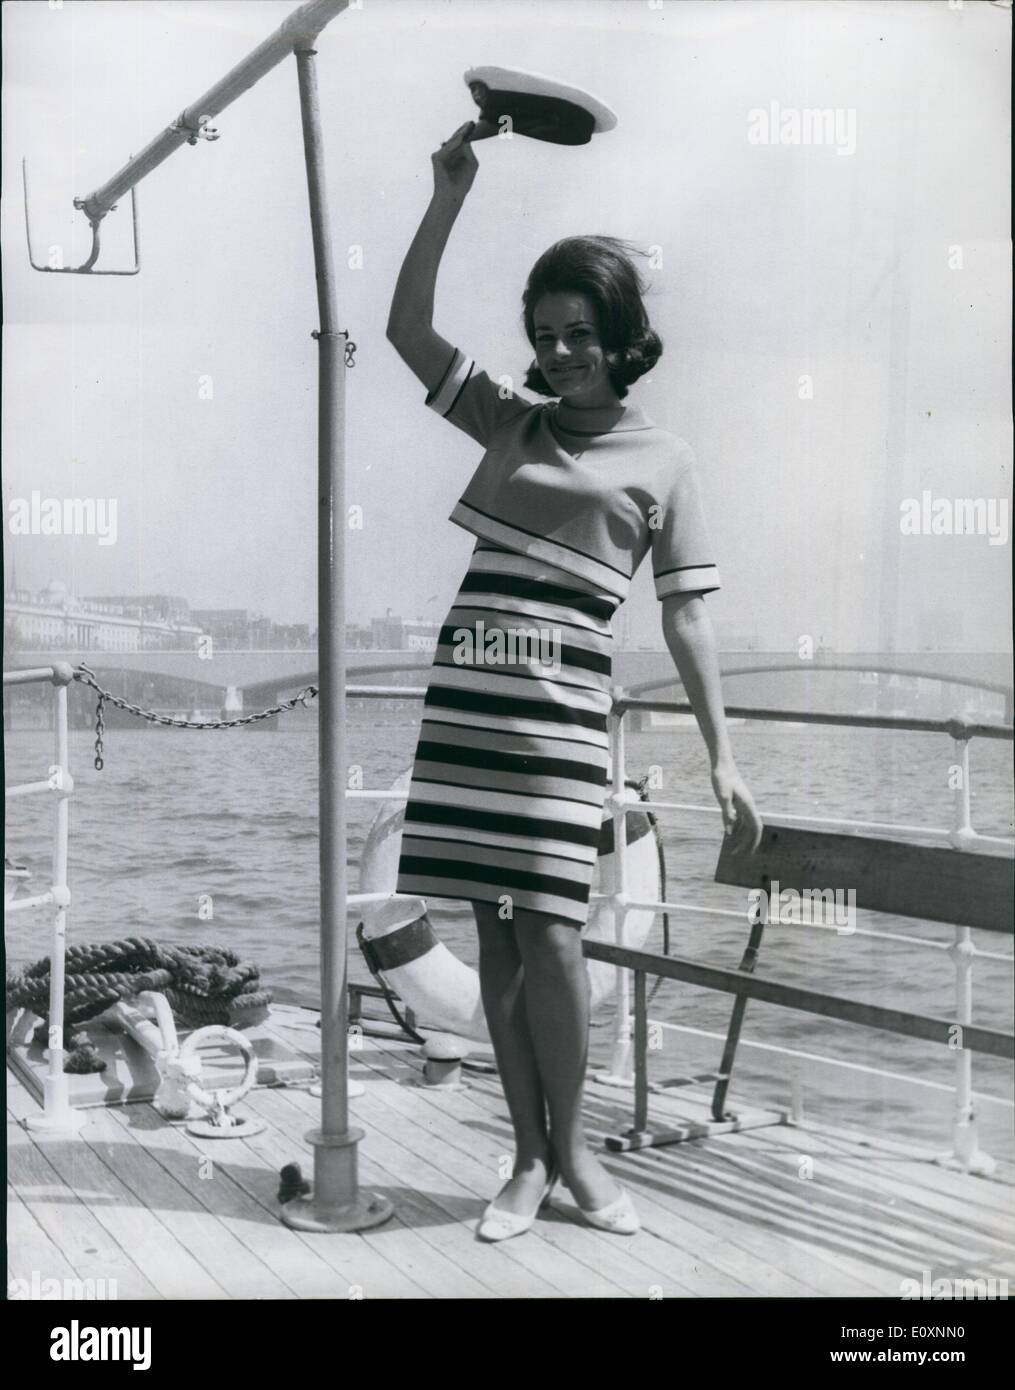 May 05, 1967 - ''Miss Australia'' arrives in Britain: Miss Margaret Roham 20-year-old, who was crowned ''Miss Australian 1967, in Perth last November is on a visit to this country from May 9th until May 18th. Today she had a trip on the Thames launch, Marchioness for a bried cruise down the river Thames, While she is here she will also visit Birmingham, and Glasgow. Photo shows ''Miss Australia''-Margaret Rohan, gives a wave on board the Thames launch. ''Marchioness'', at the start of her trip on the Thames today. Stock Photo